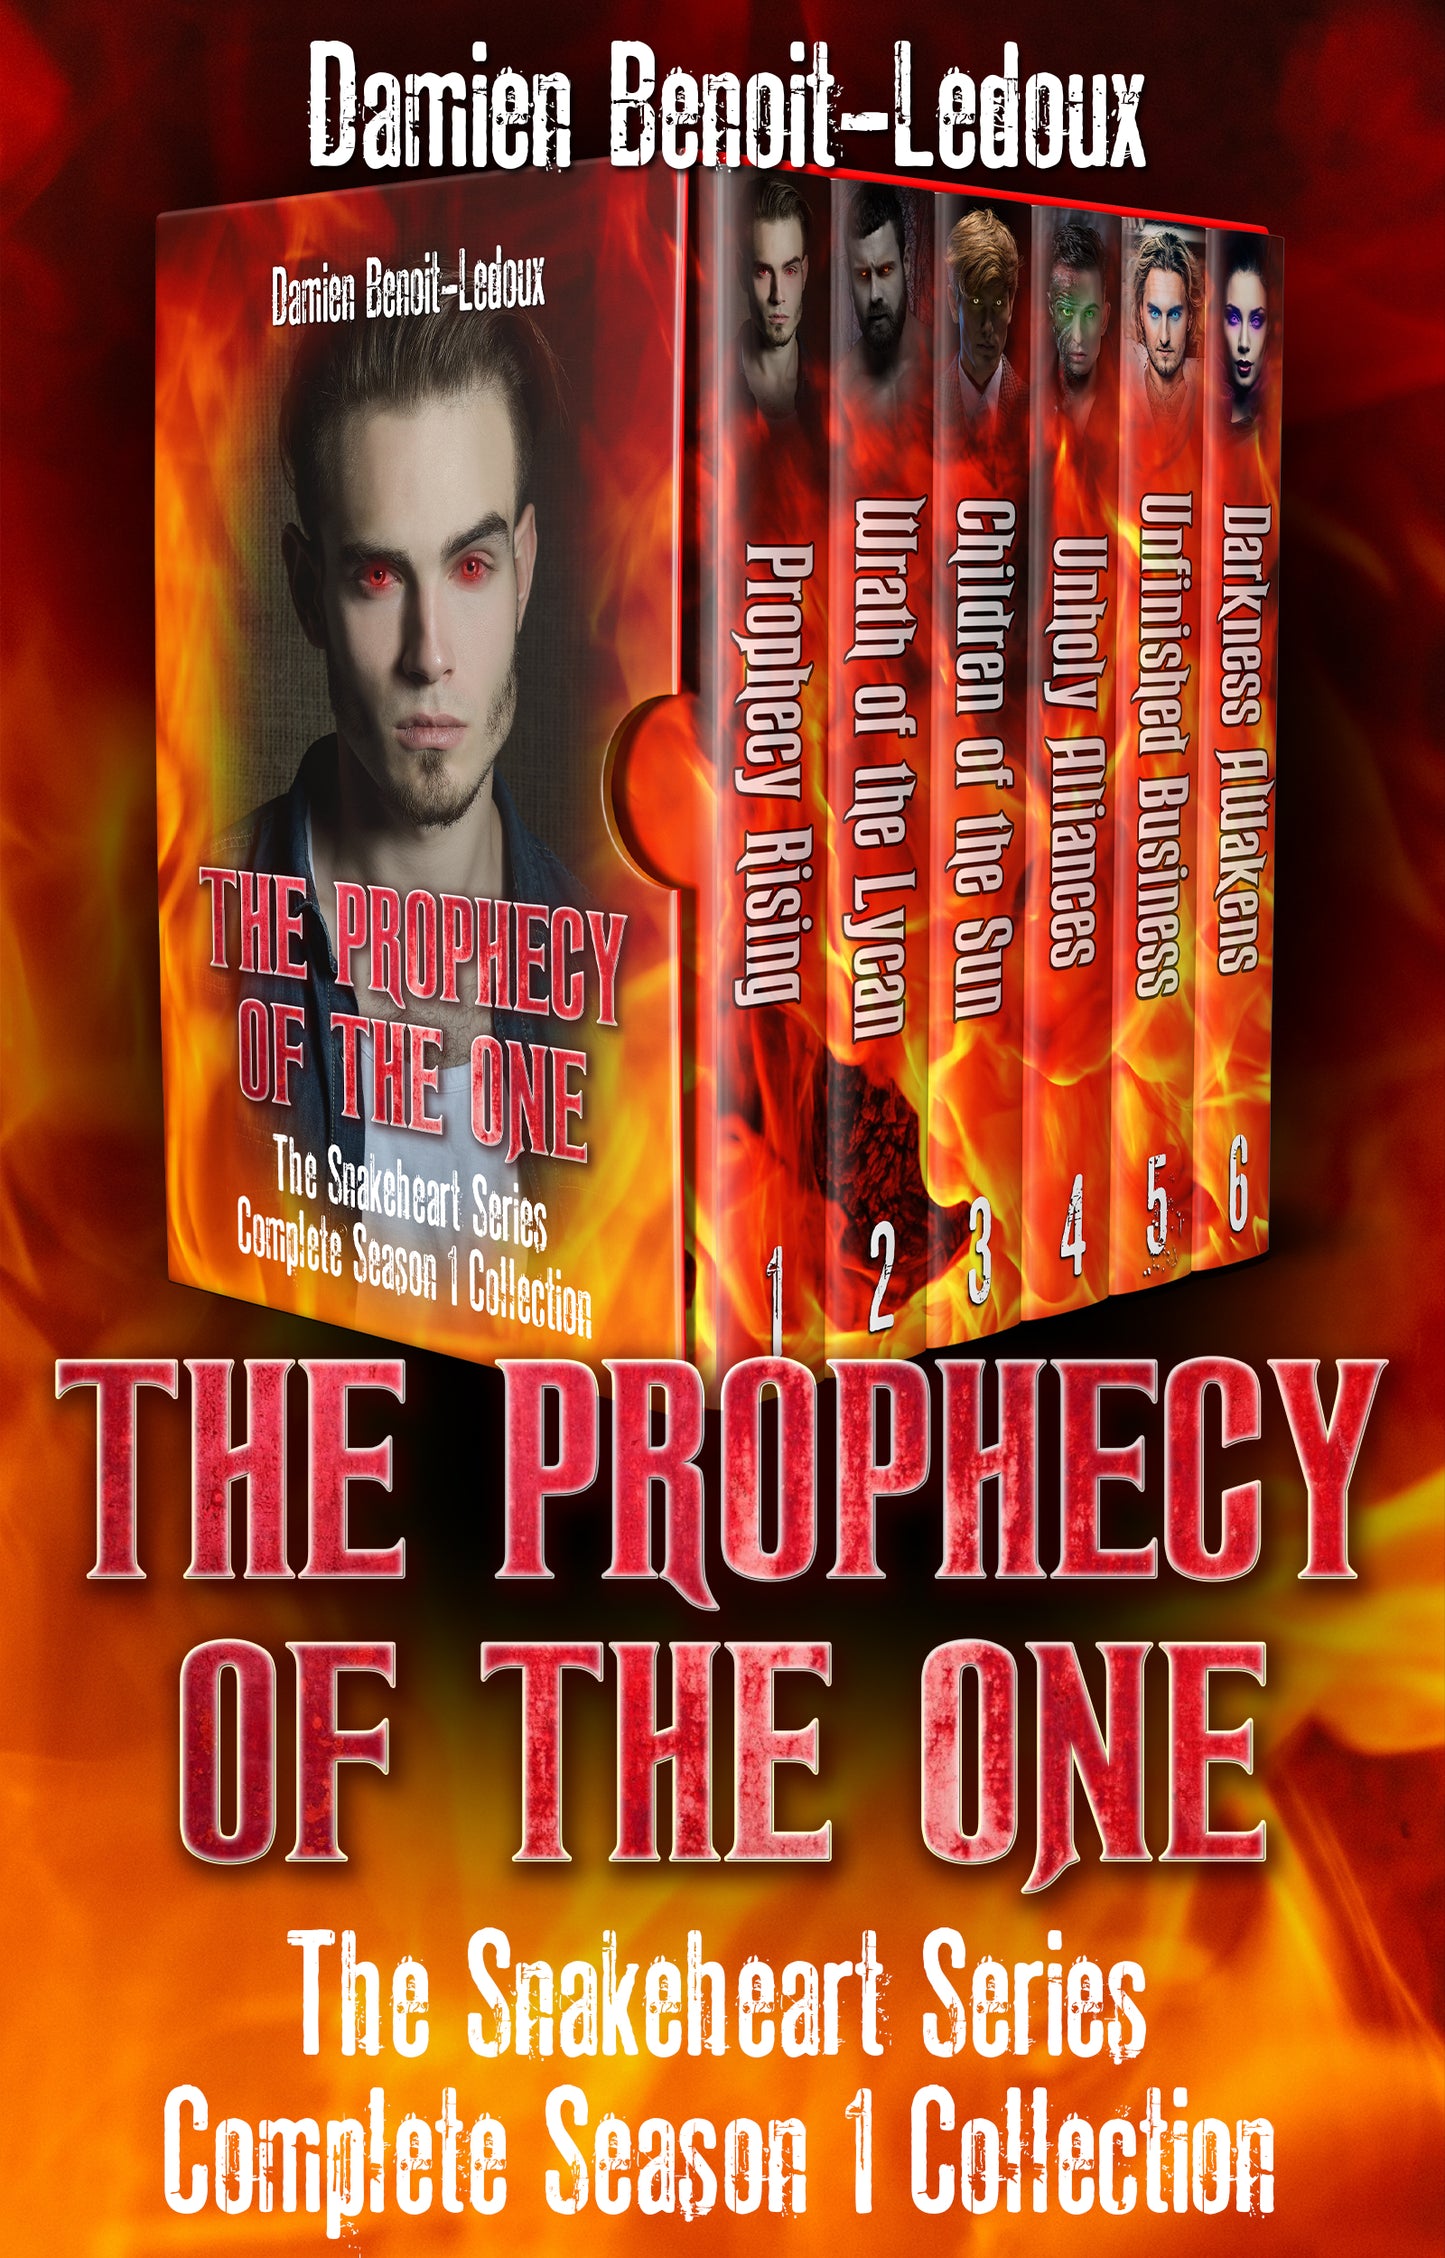 The Prophecy of The One (Season 1 Box Set) (paperback)